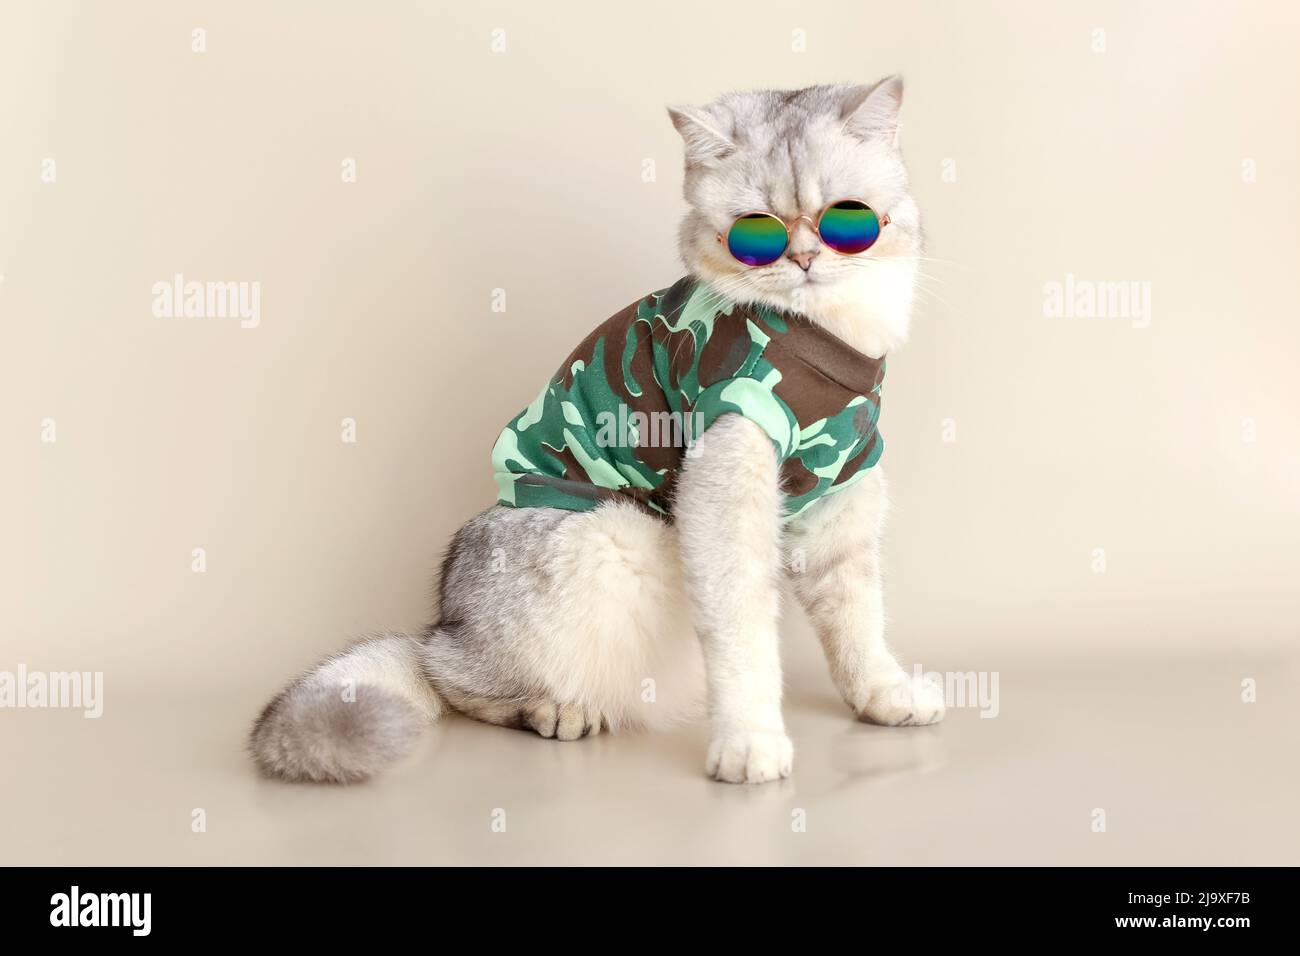 A cat in sunglasses and a military-style T-shirt, sitting on a beige background Stock Photo